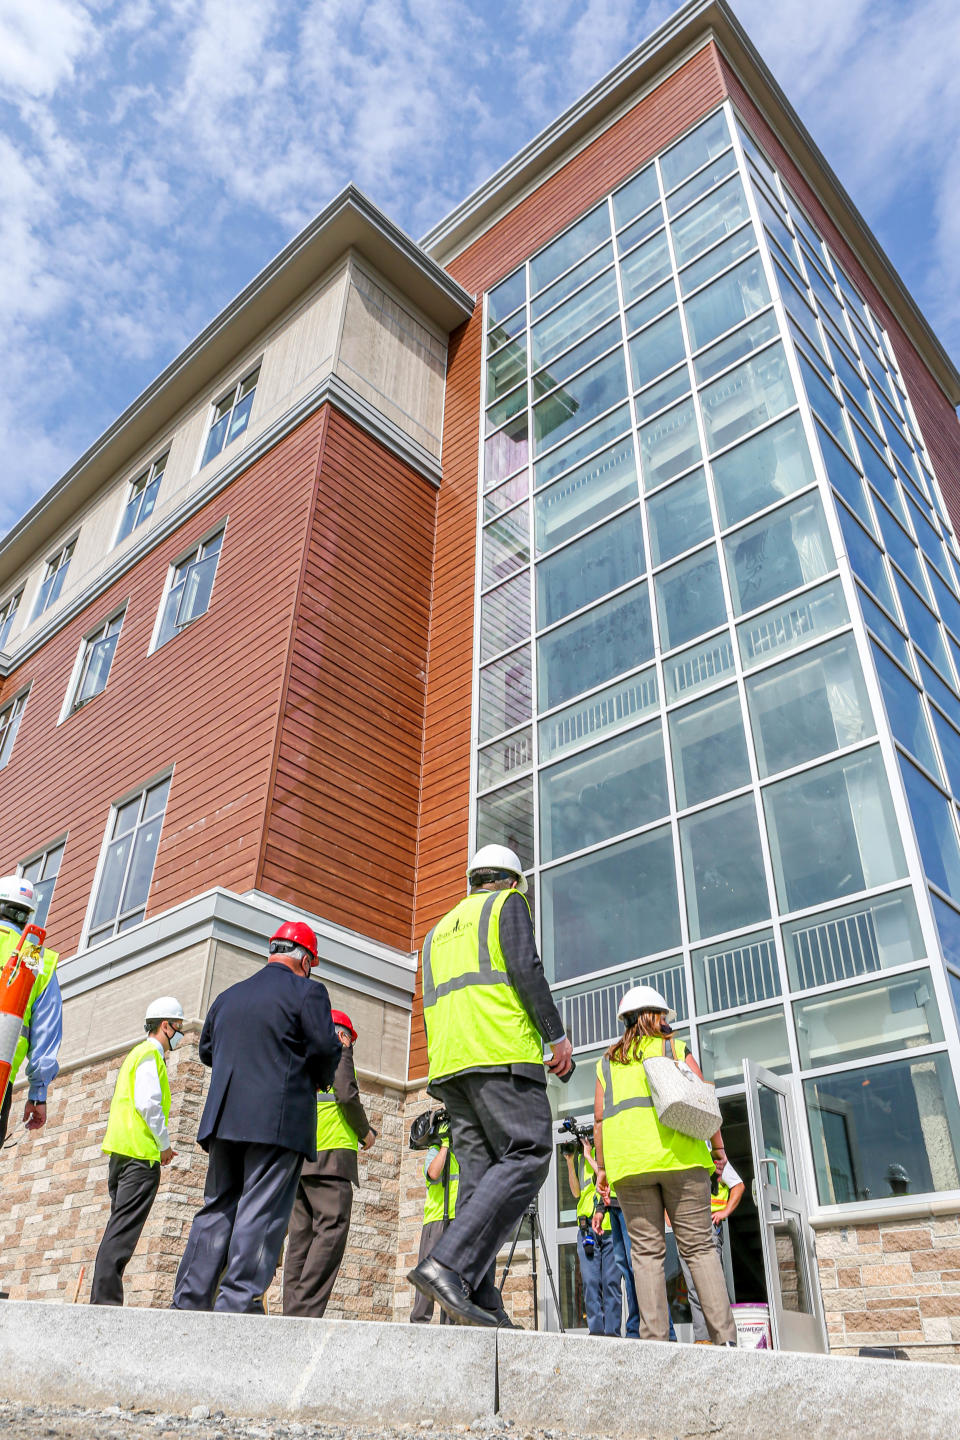 Towering glass and open spaces inside are hallmarks of East Providence's new high school.